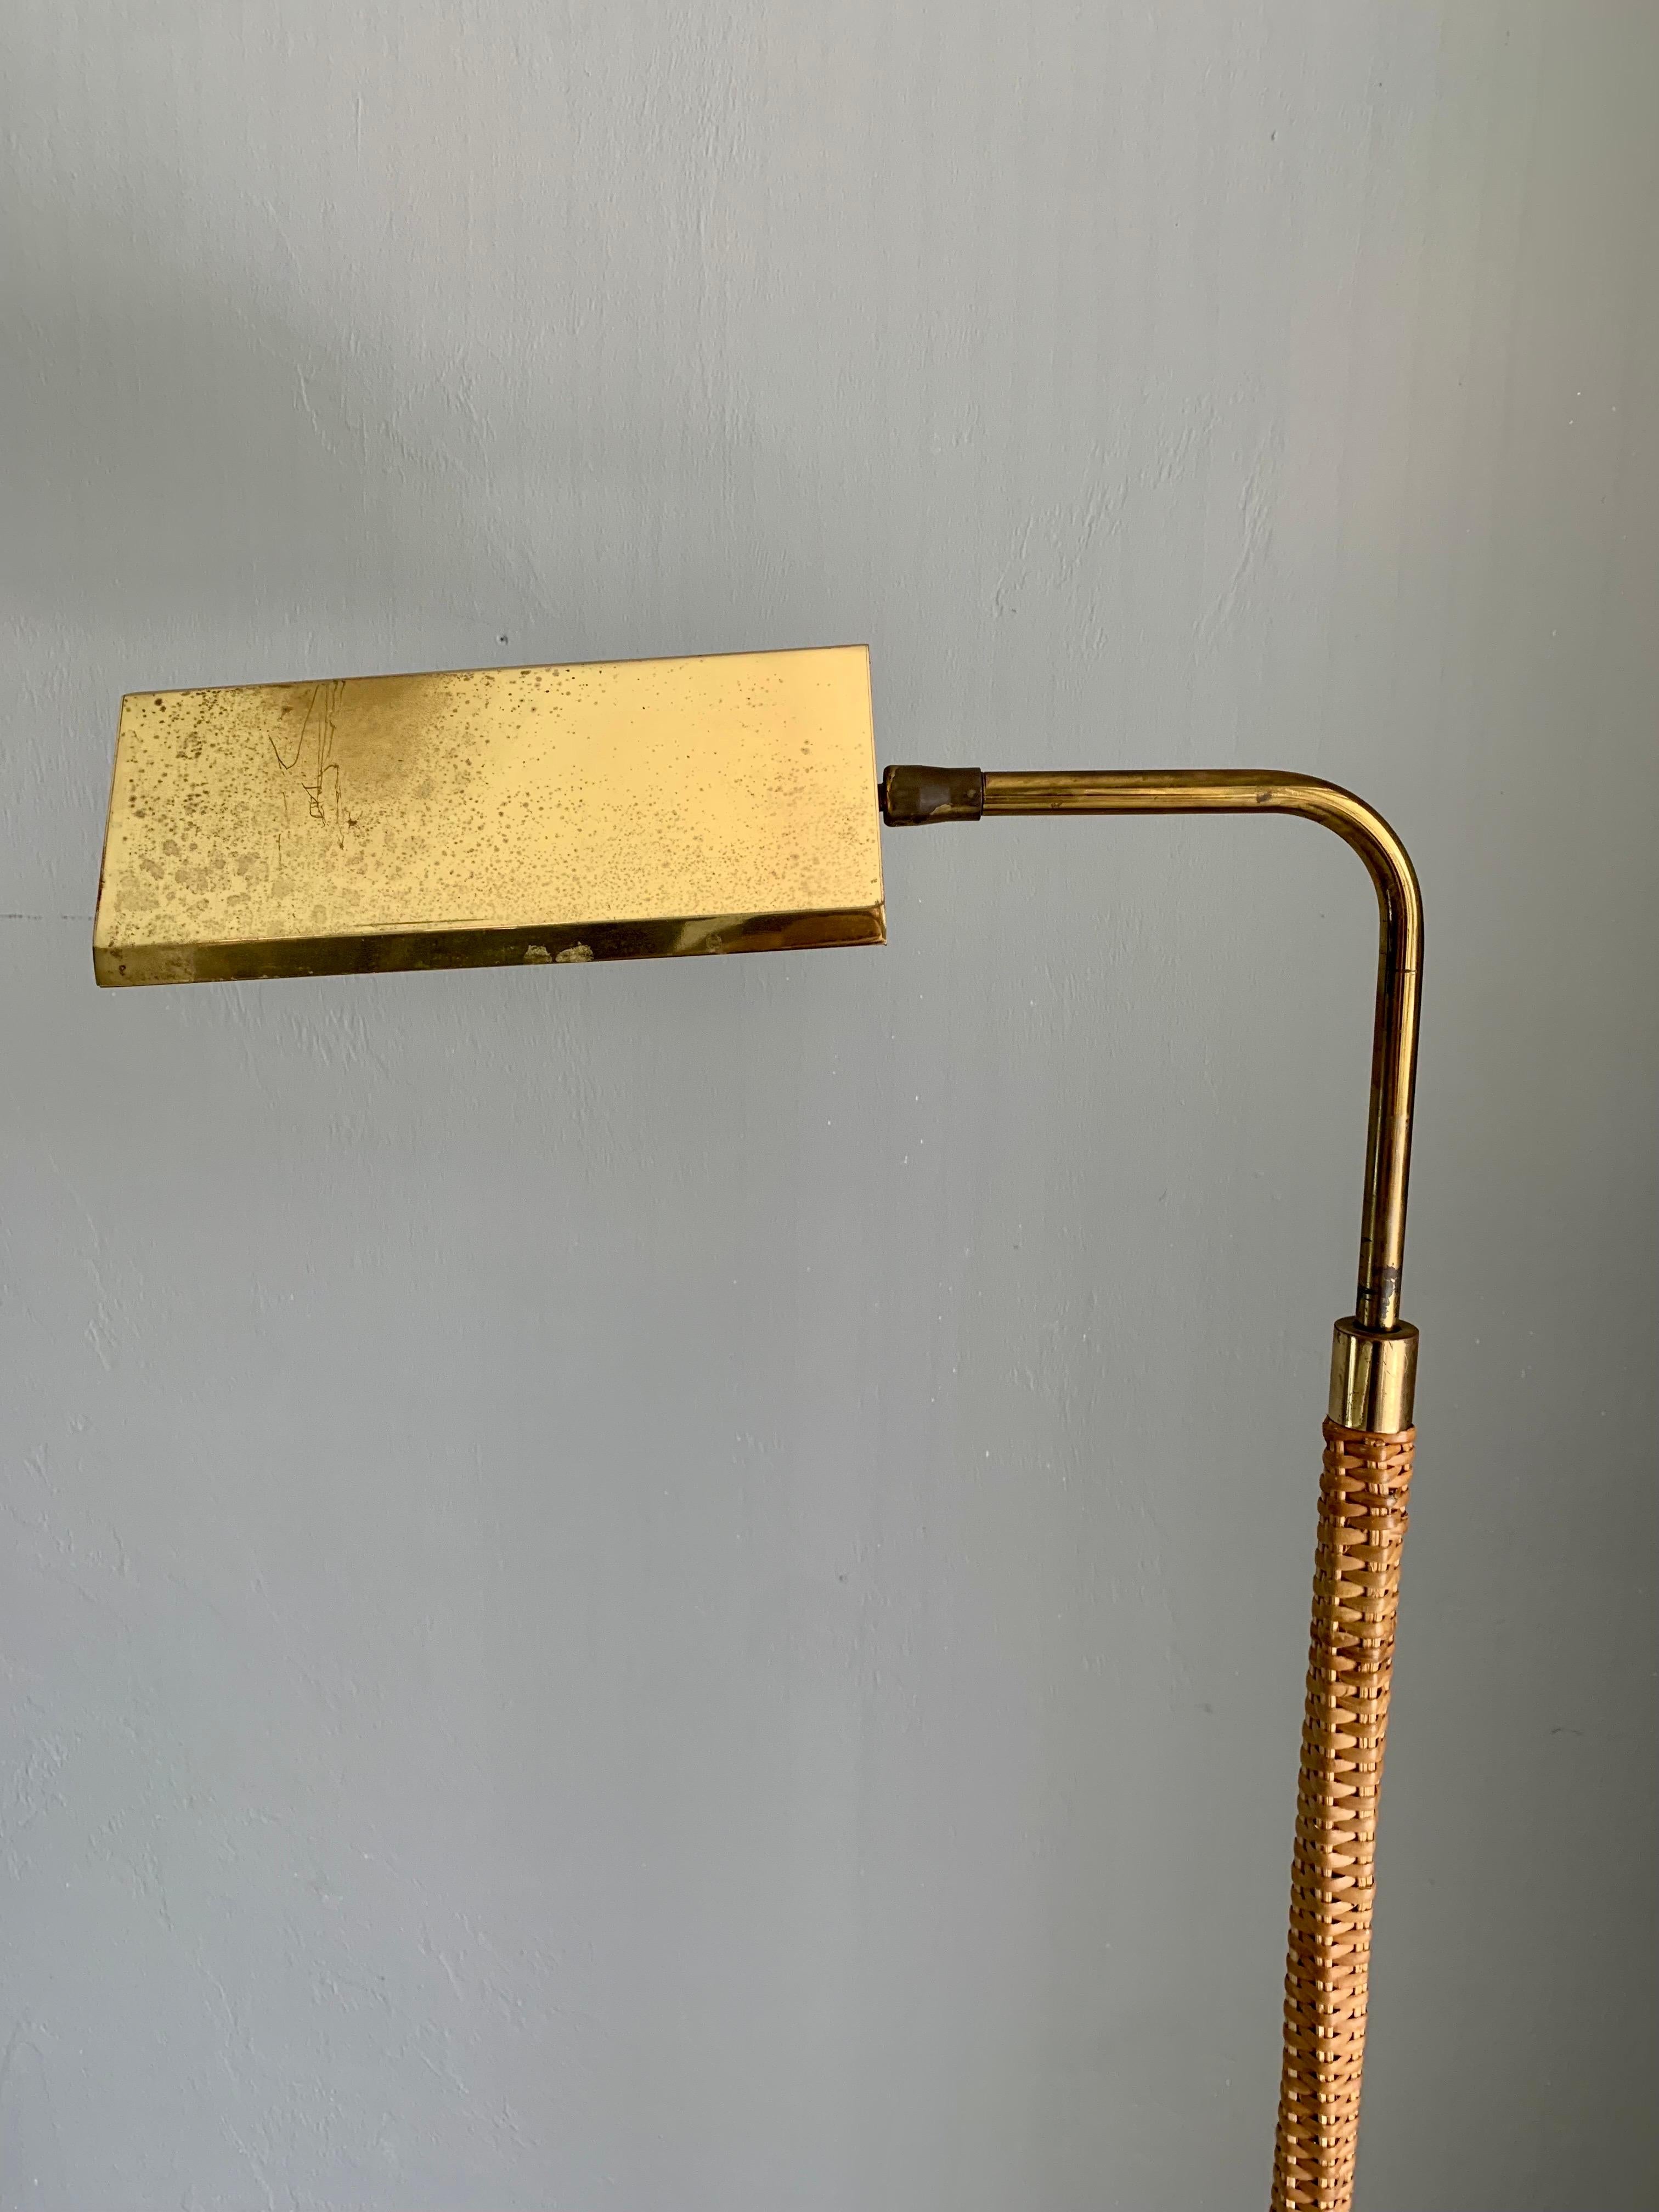 A floor lamp, made by an unknown designer. Brass rod construction with the bottom portion expertly wrapped in cane. 

Adjustable height and shade. All brass. The switch allows you to sim the lamp to desired brightness. 

Beautiful patina through